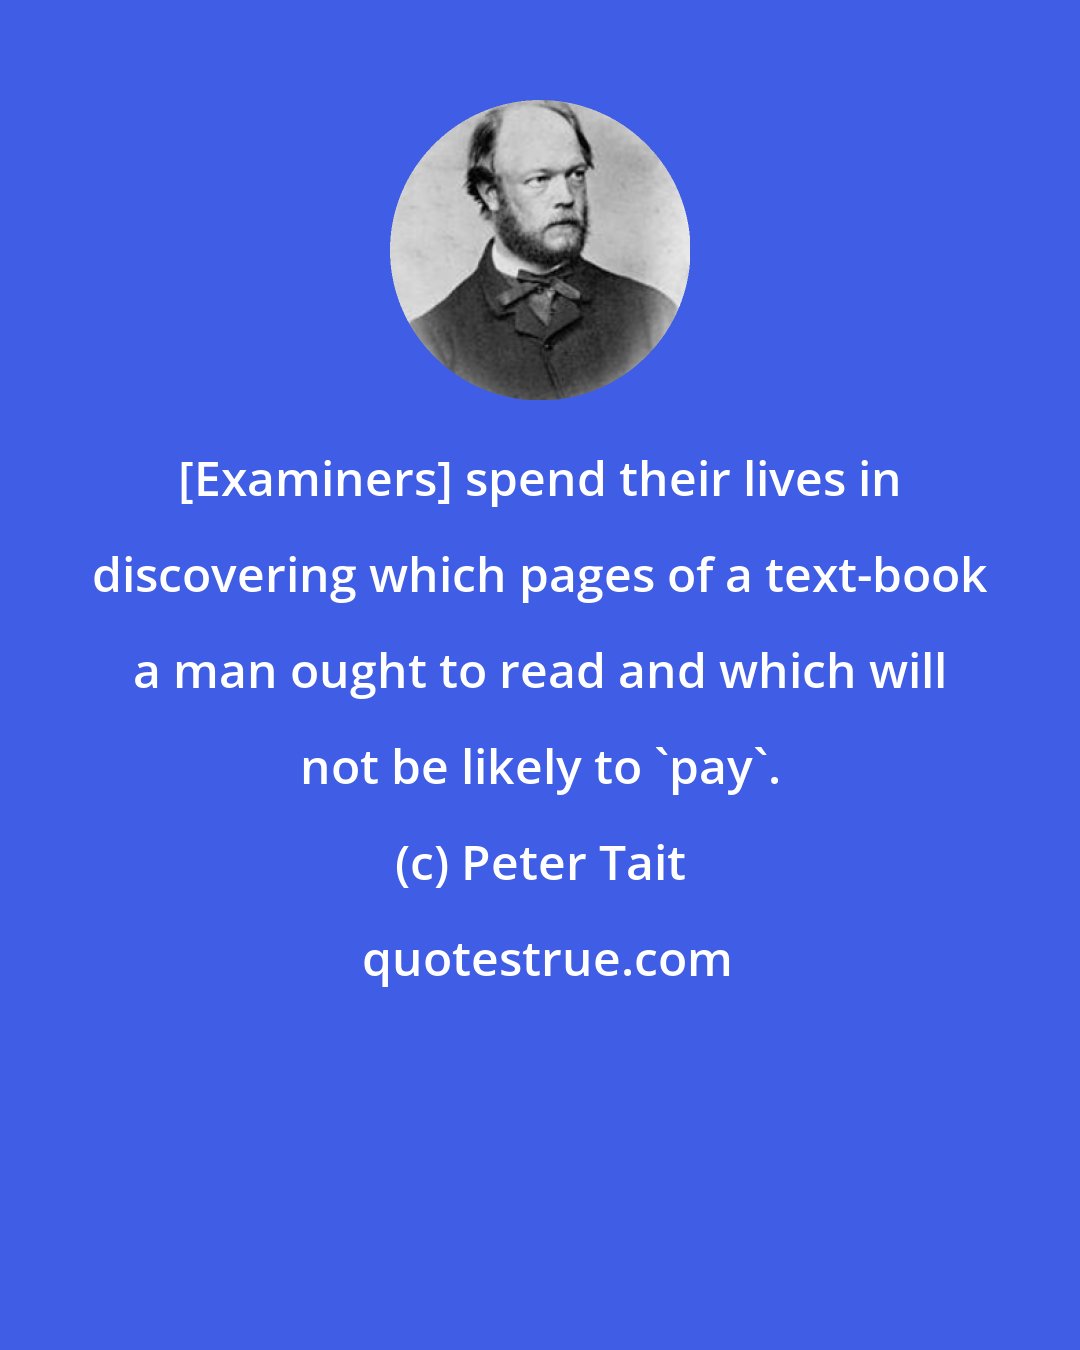 Peter Tait: [Examiners] spend their lives in discovering which pages of a text-book a man ought to read and which will not be likely to 'pay'.